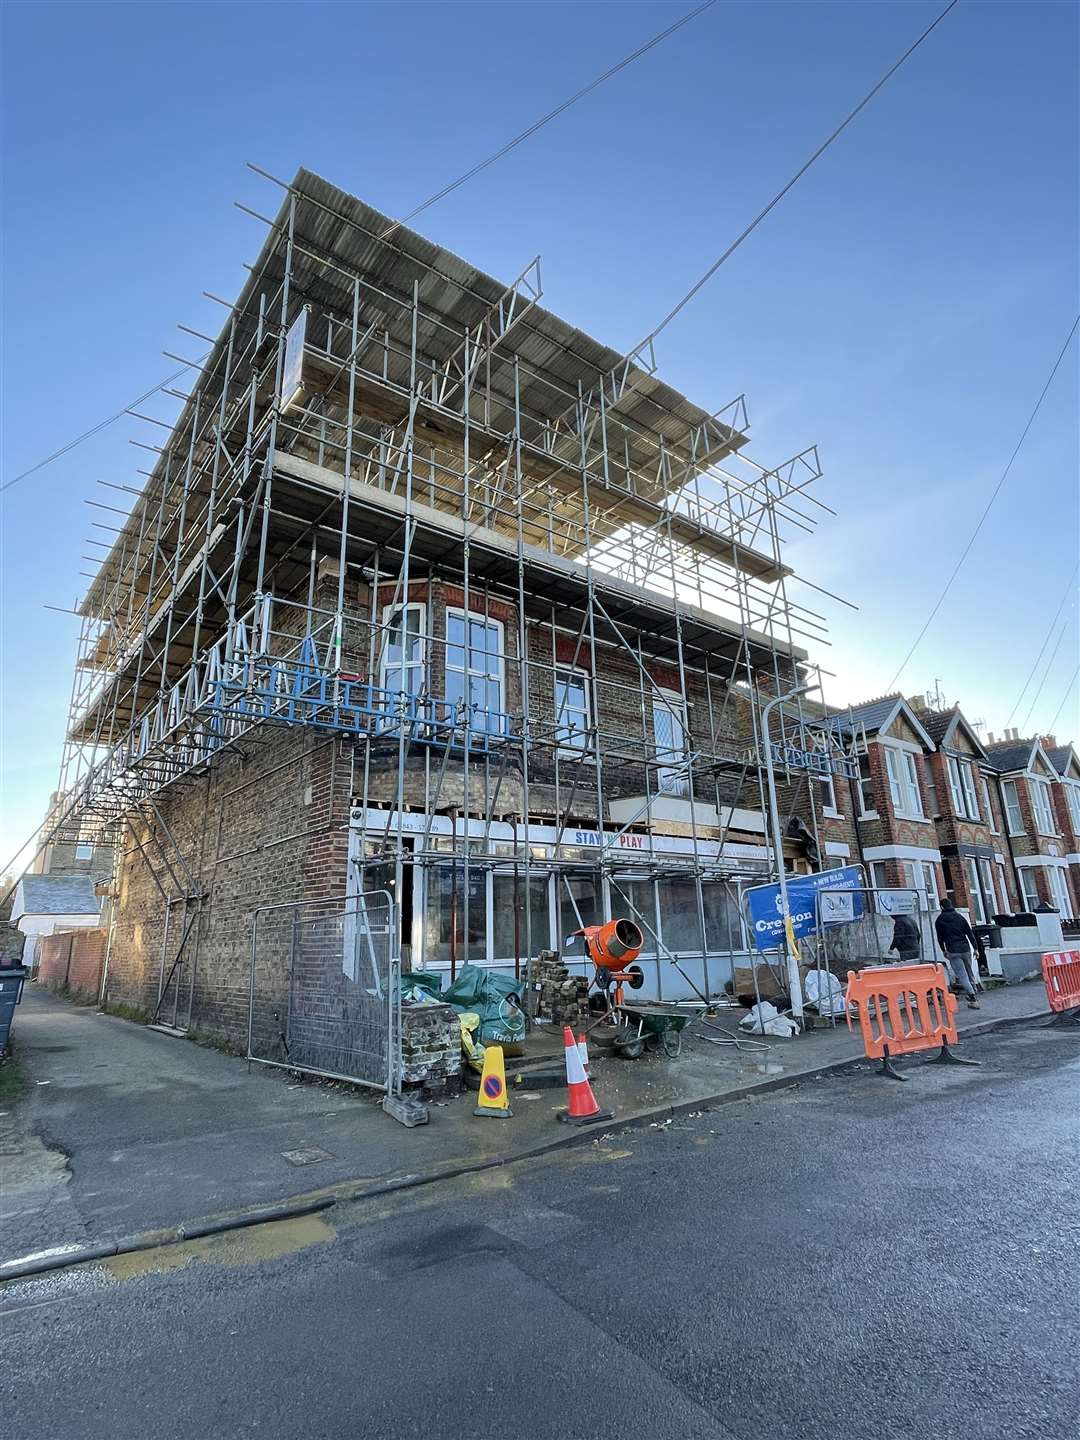 The building clad in scaffolding while the work was underway